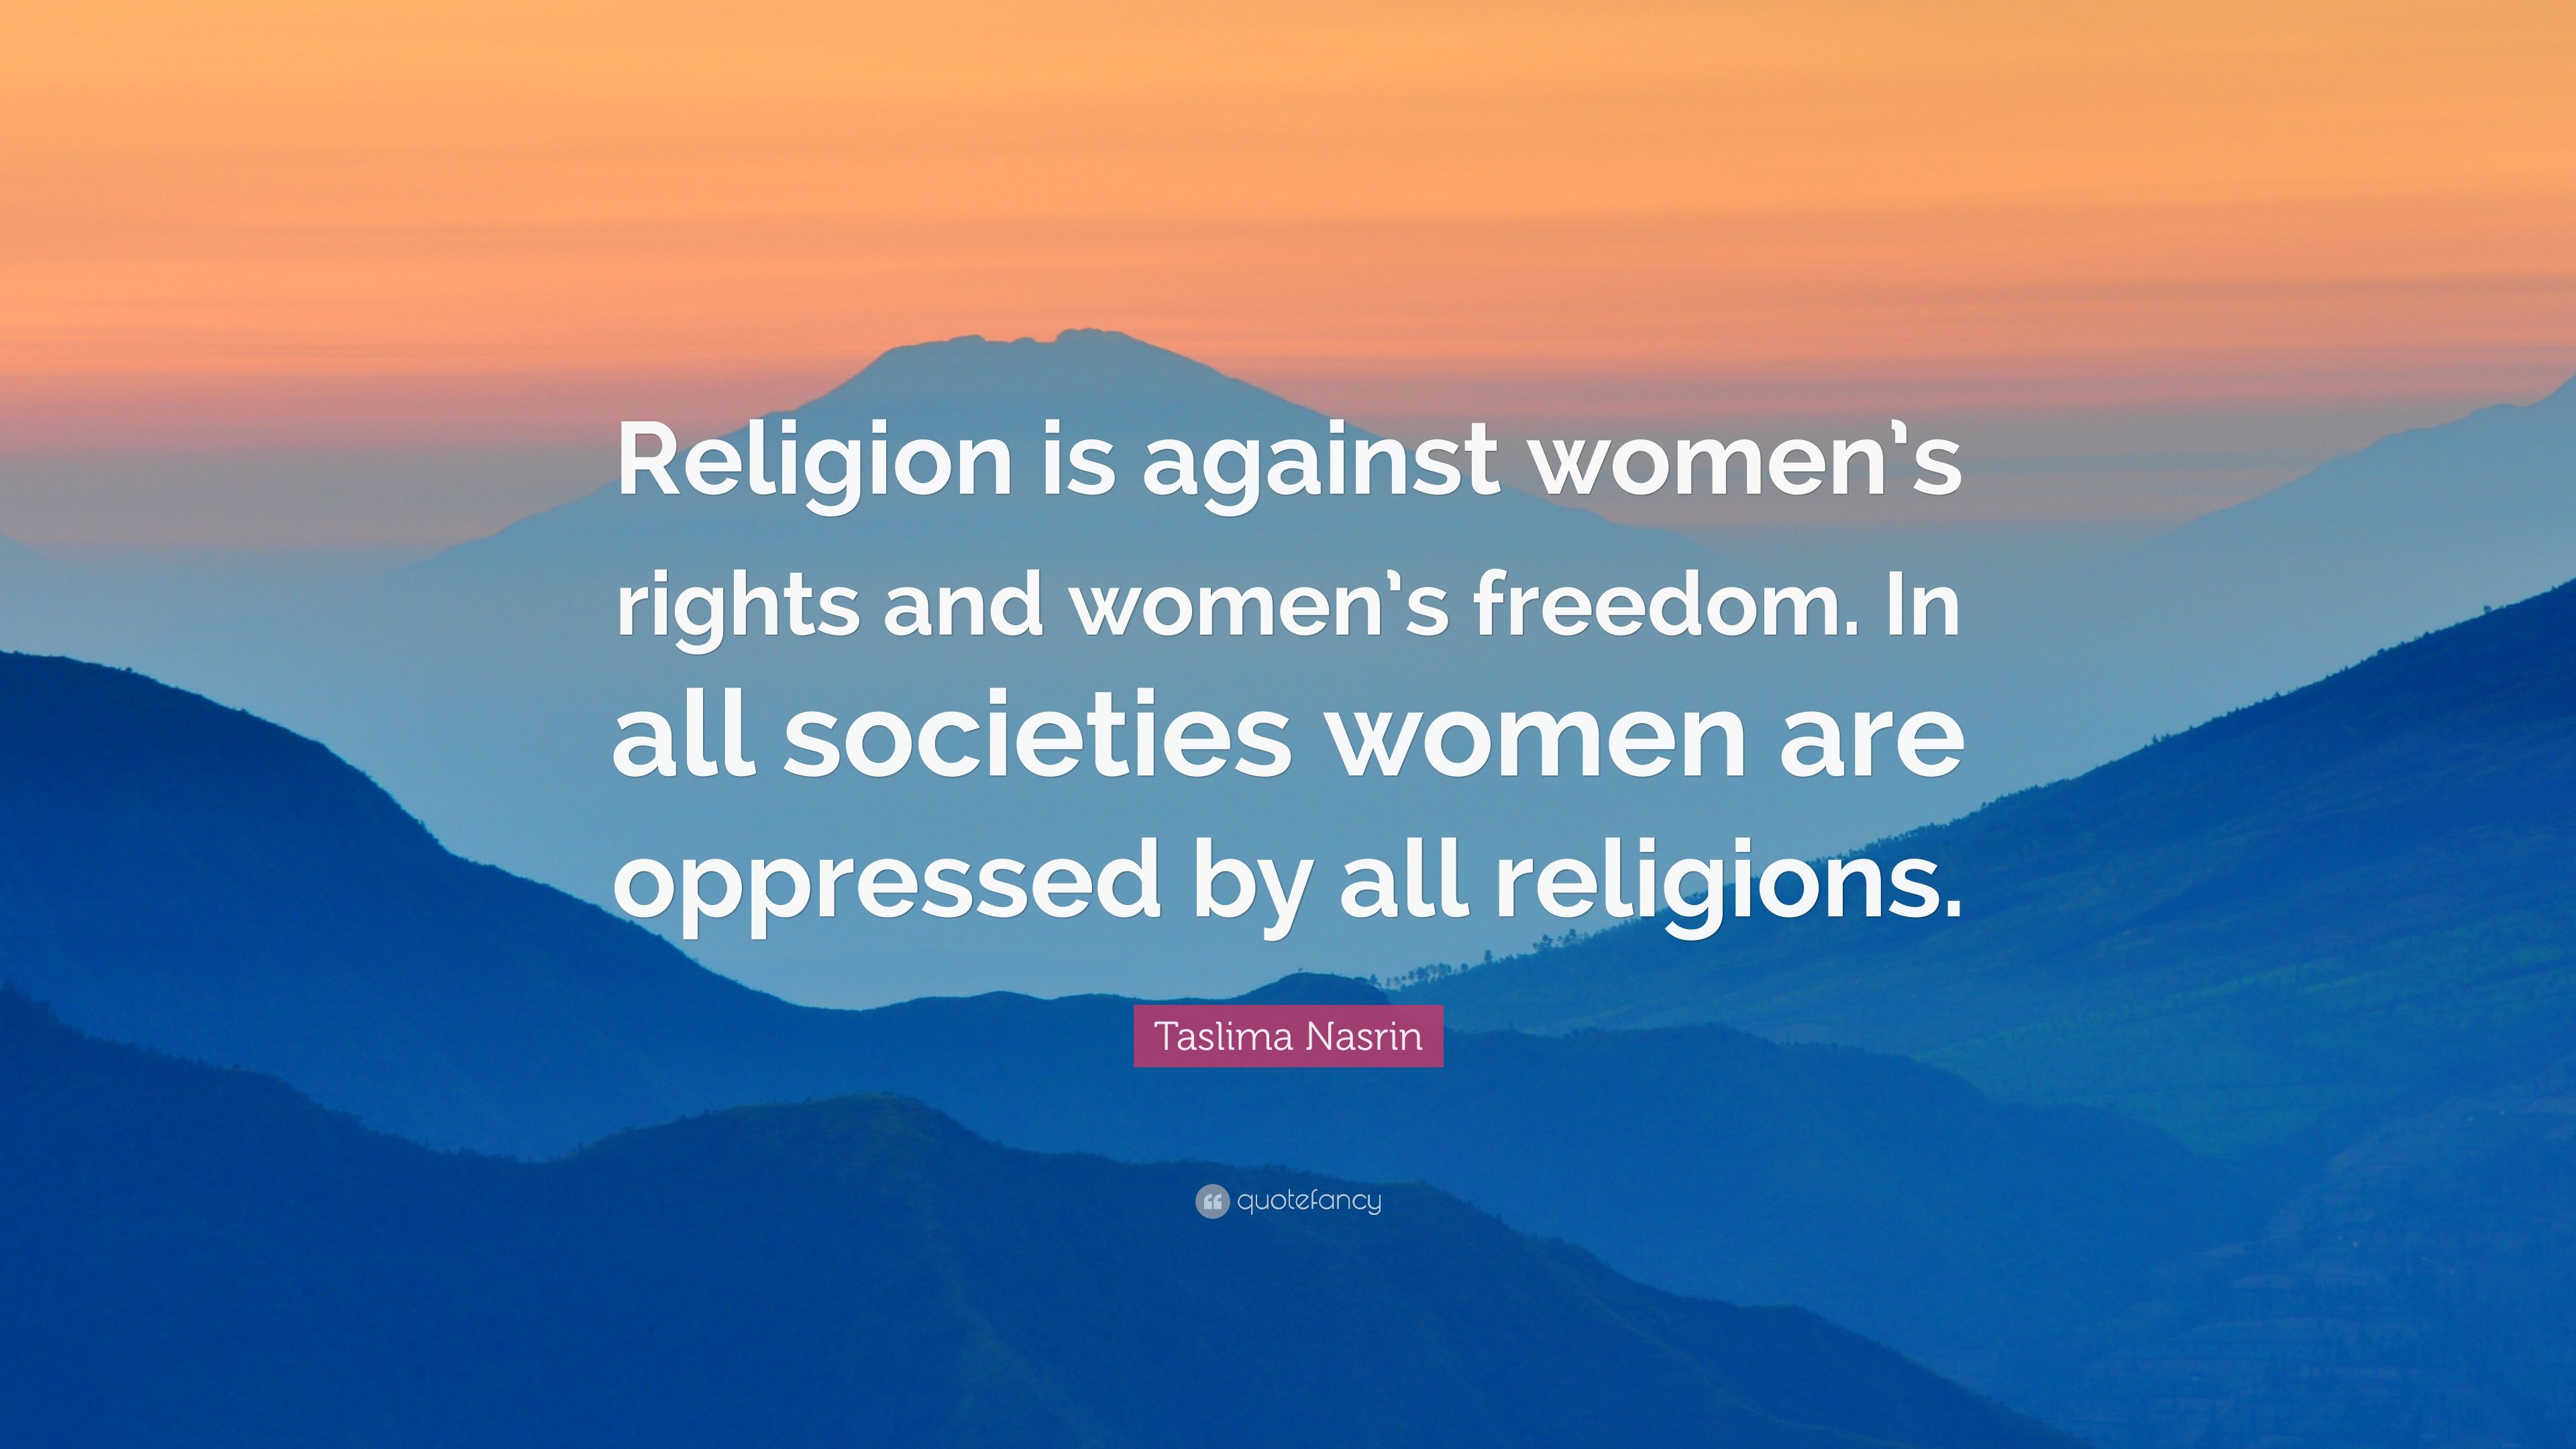 Taslima Nasrin Quote: “Religion is against women's rights